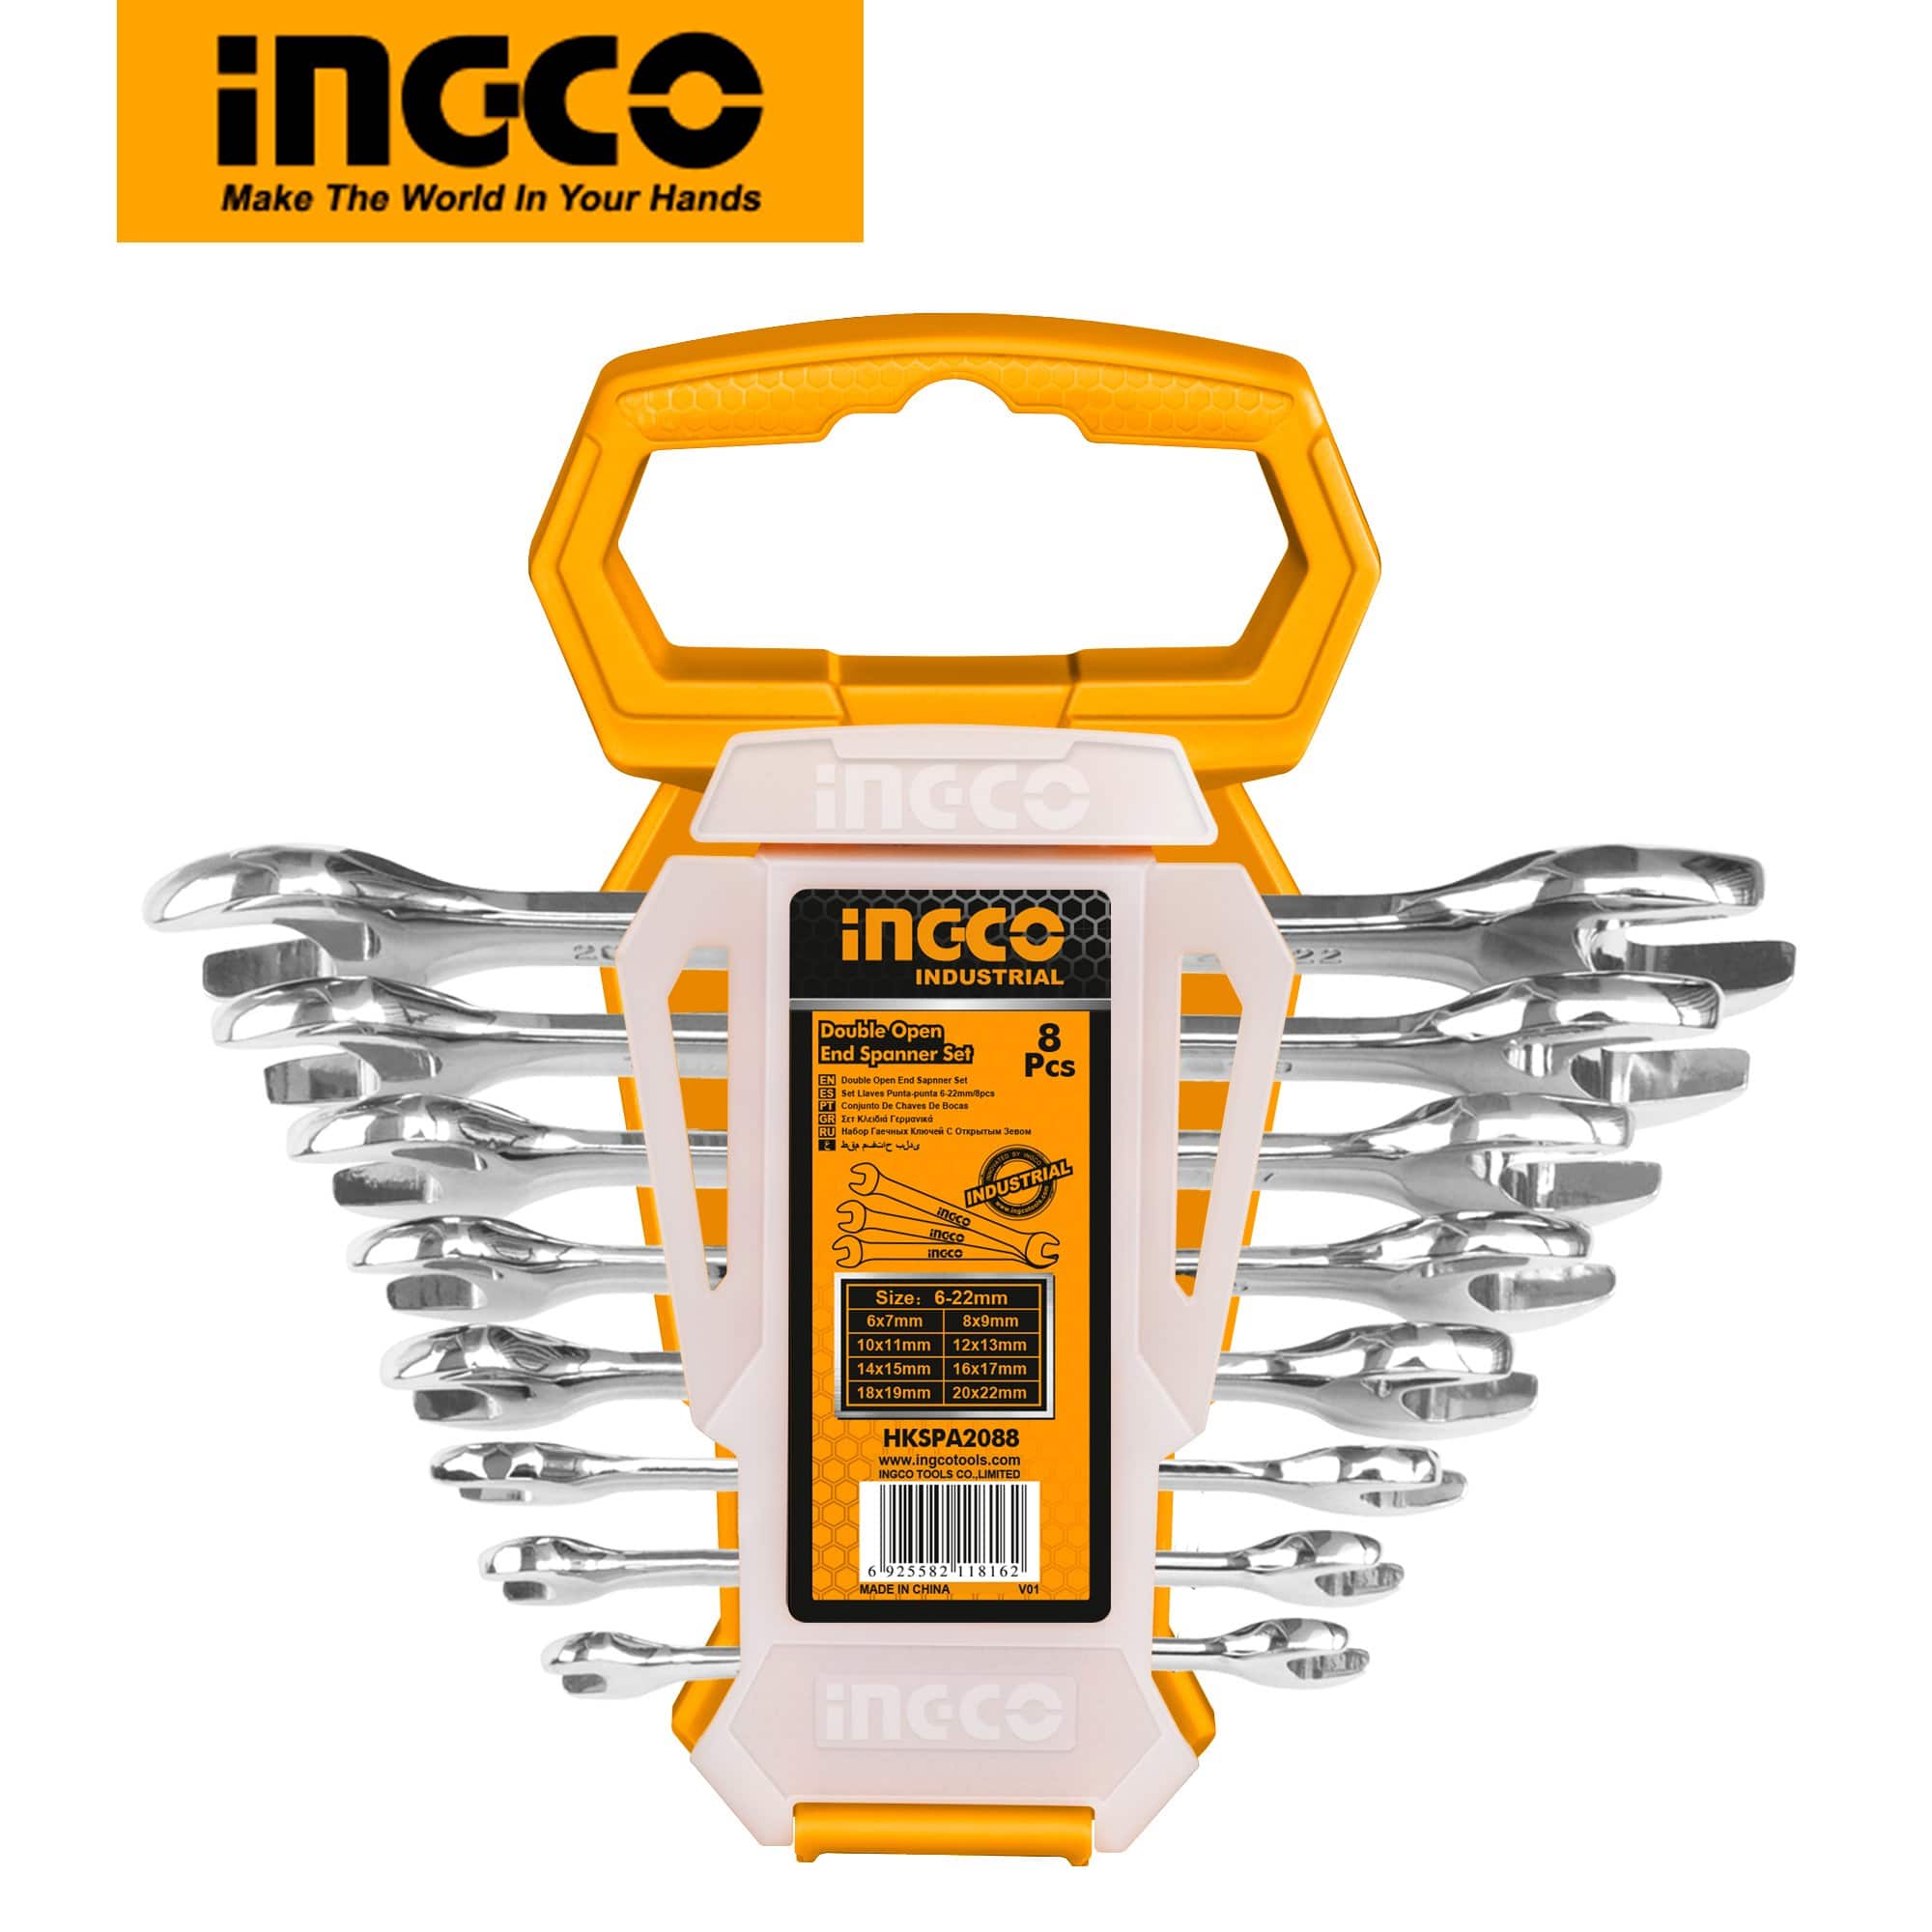 Ingco 8 Pieces Insulated Open End Spanner Set - HKSPA2088 supply-master